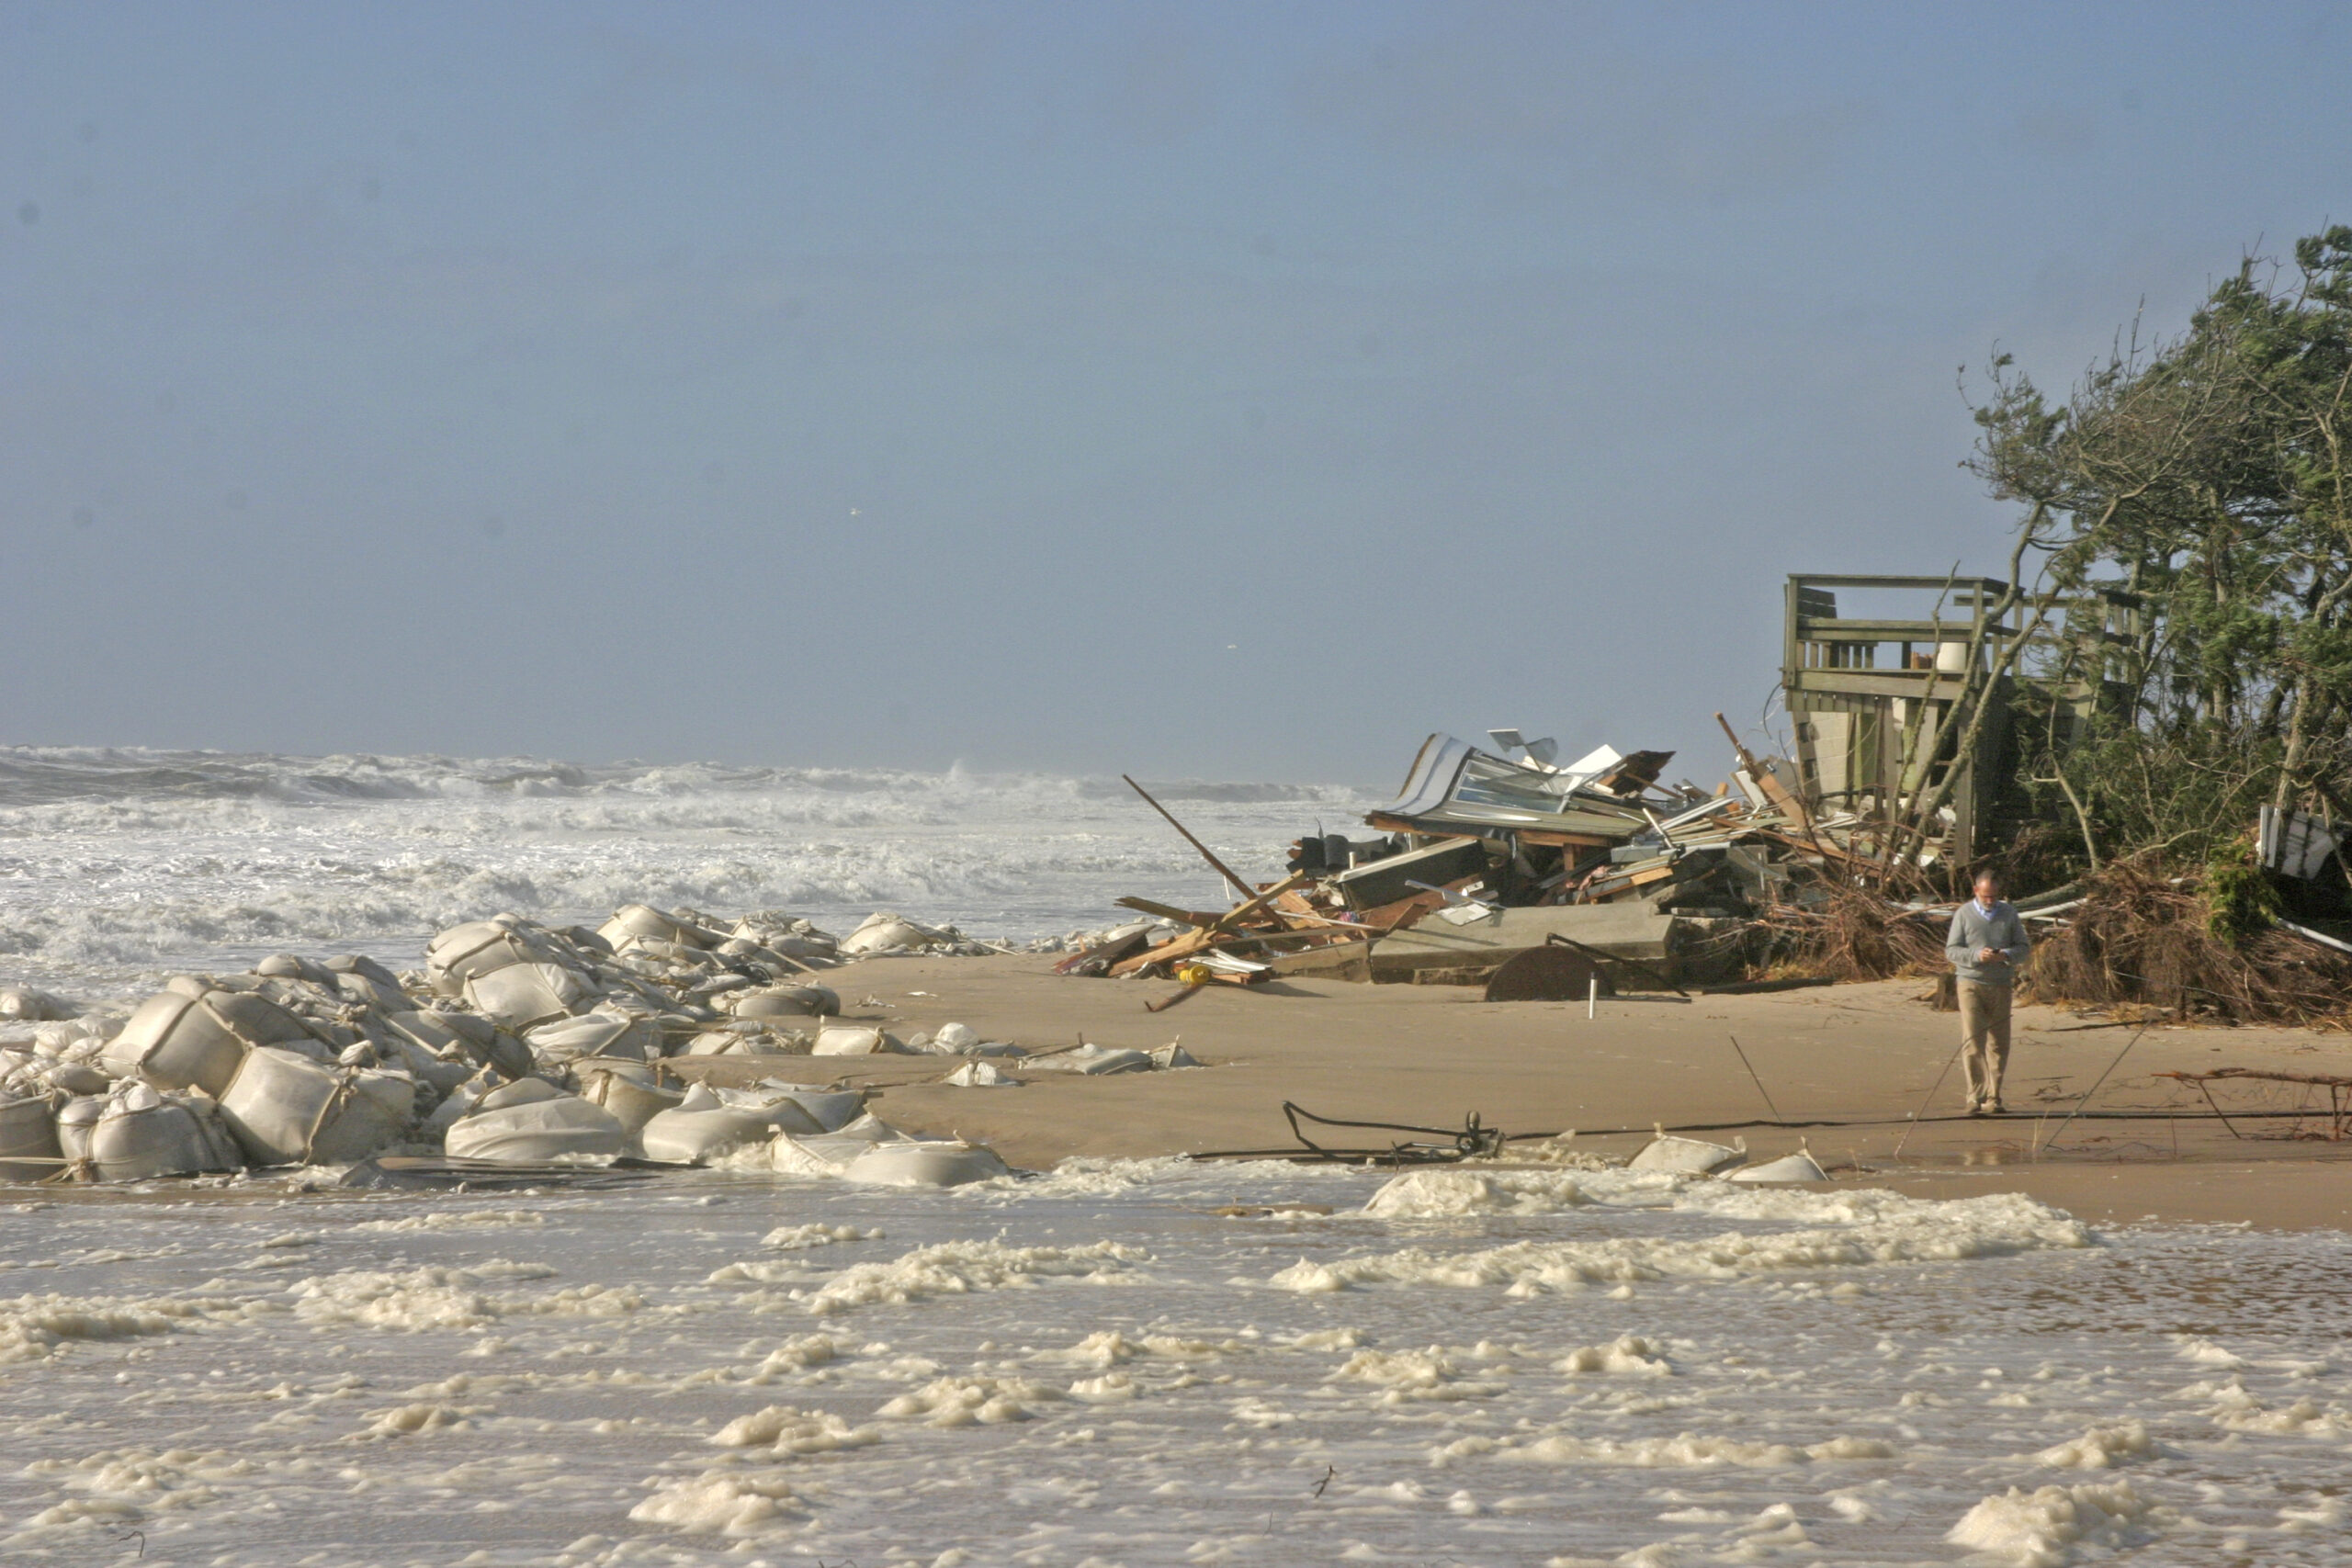 Ten years ago, Superstorm Sandy caused widespread damage to the East End.